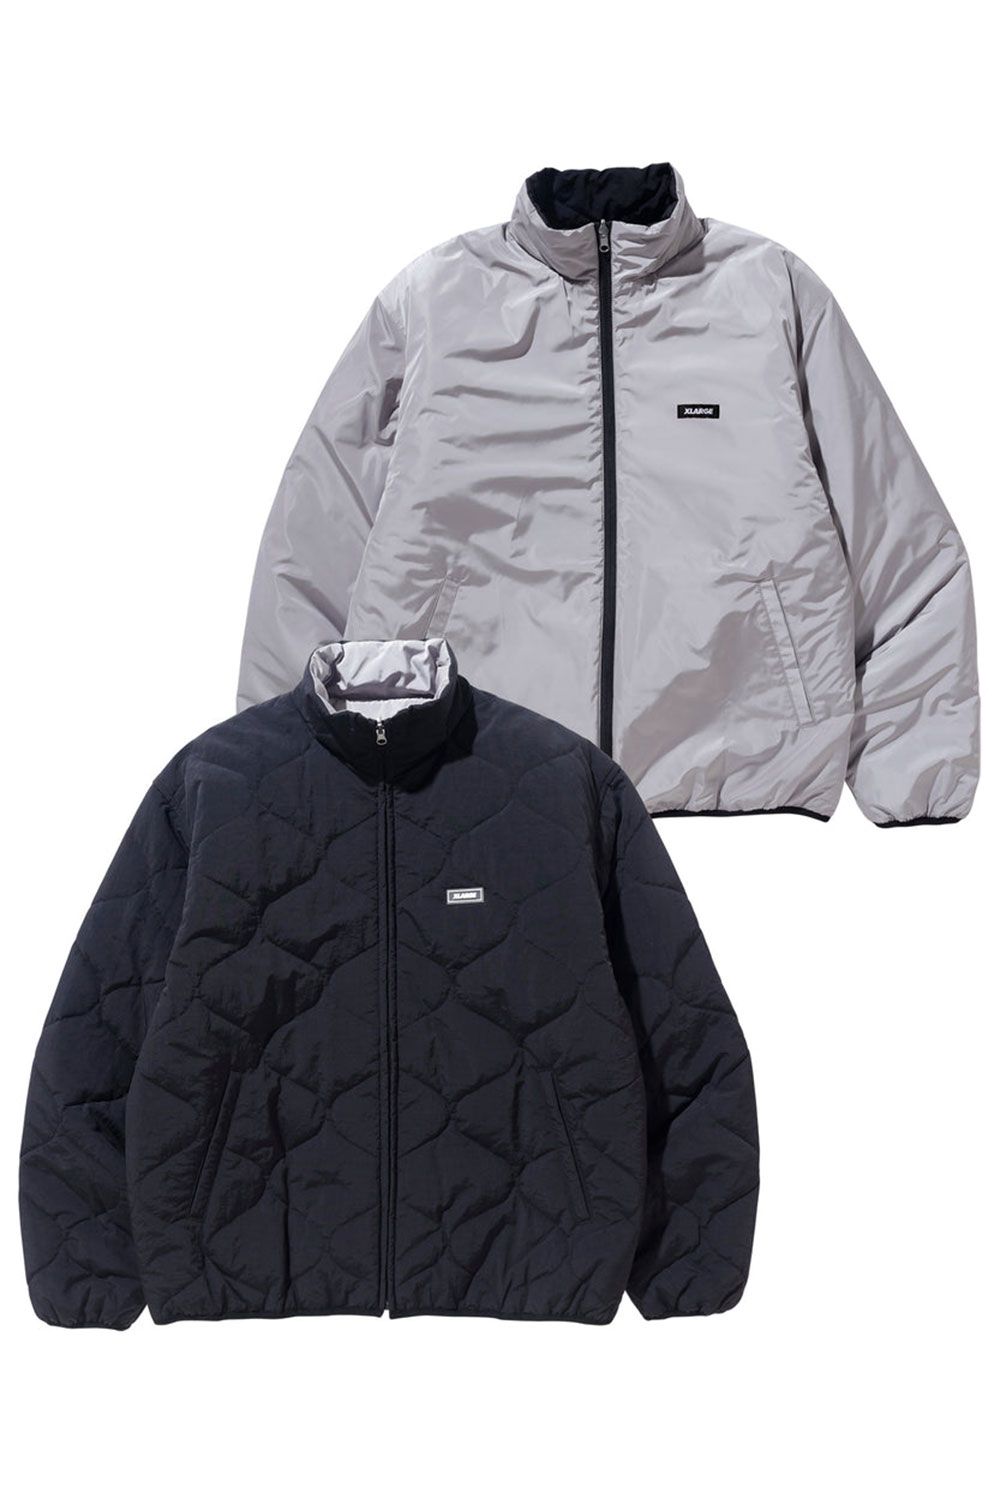 XLARGE - REVERSIBLE QUILTED JACKET / ブラック | Tempt